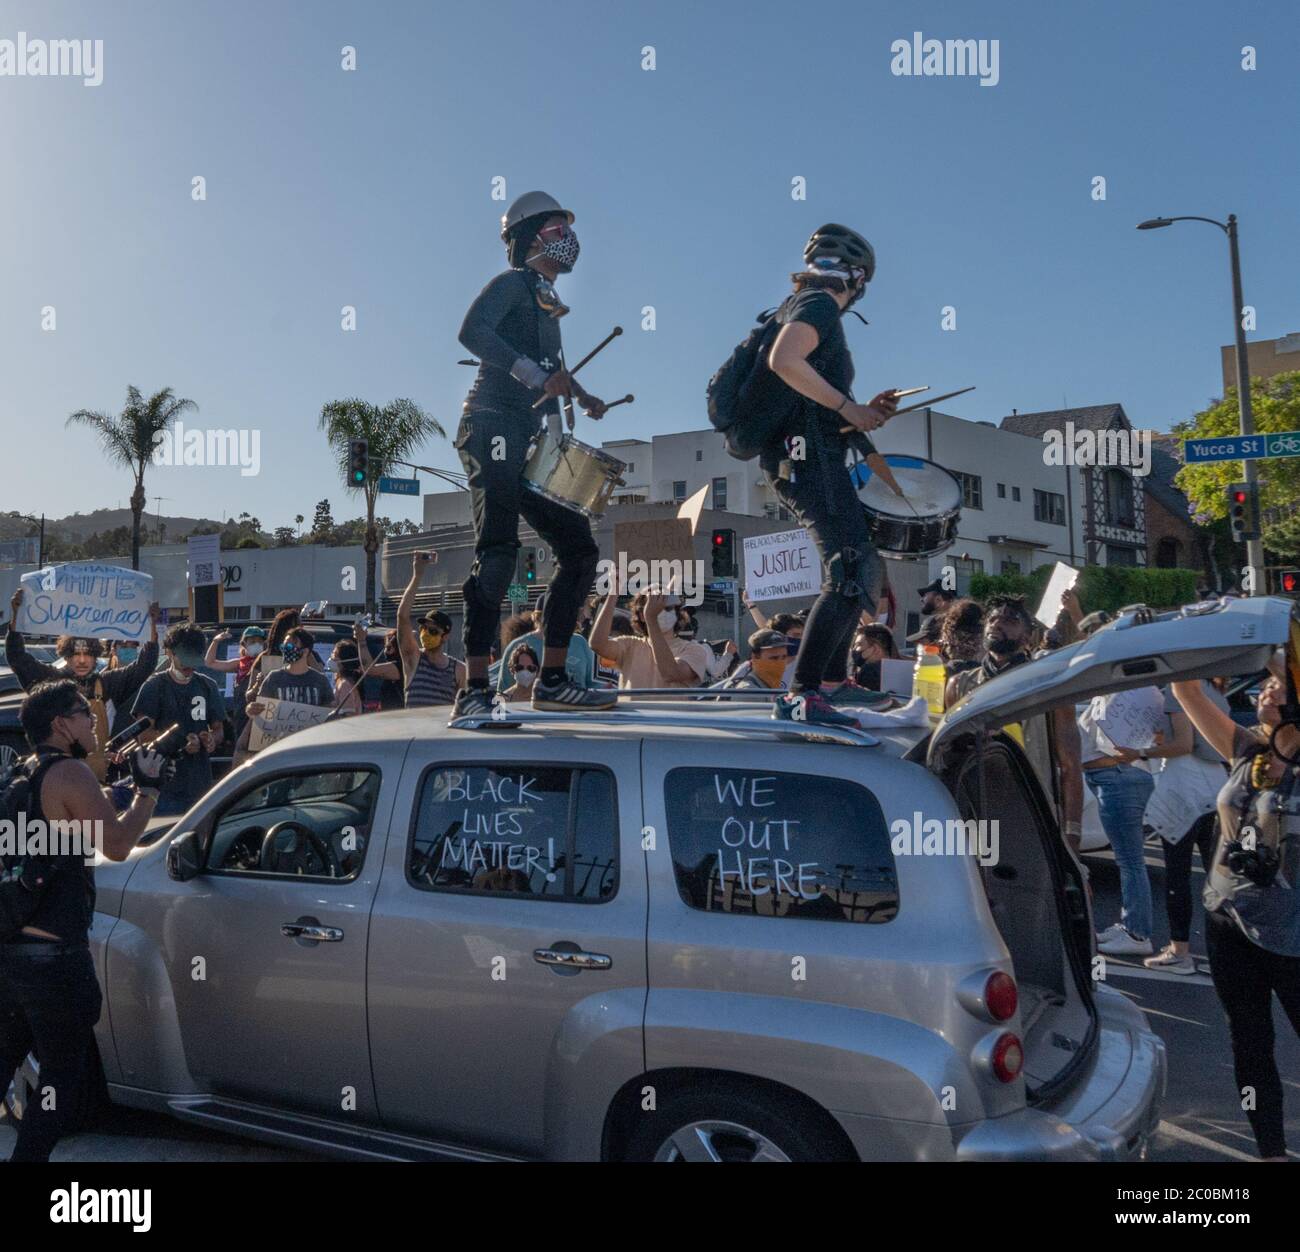 Black Lives matter protesters in Hollywood California ignore Covid19 social distancing as they play music, dance and should protest slogans. Stock Photo